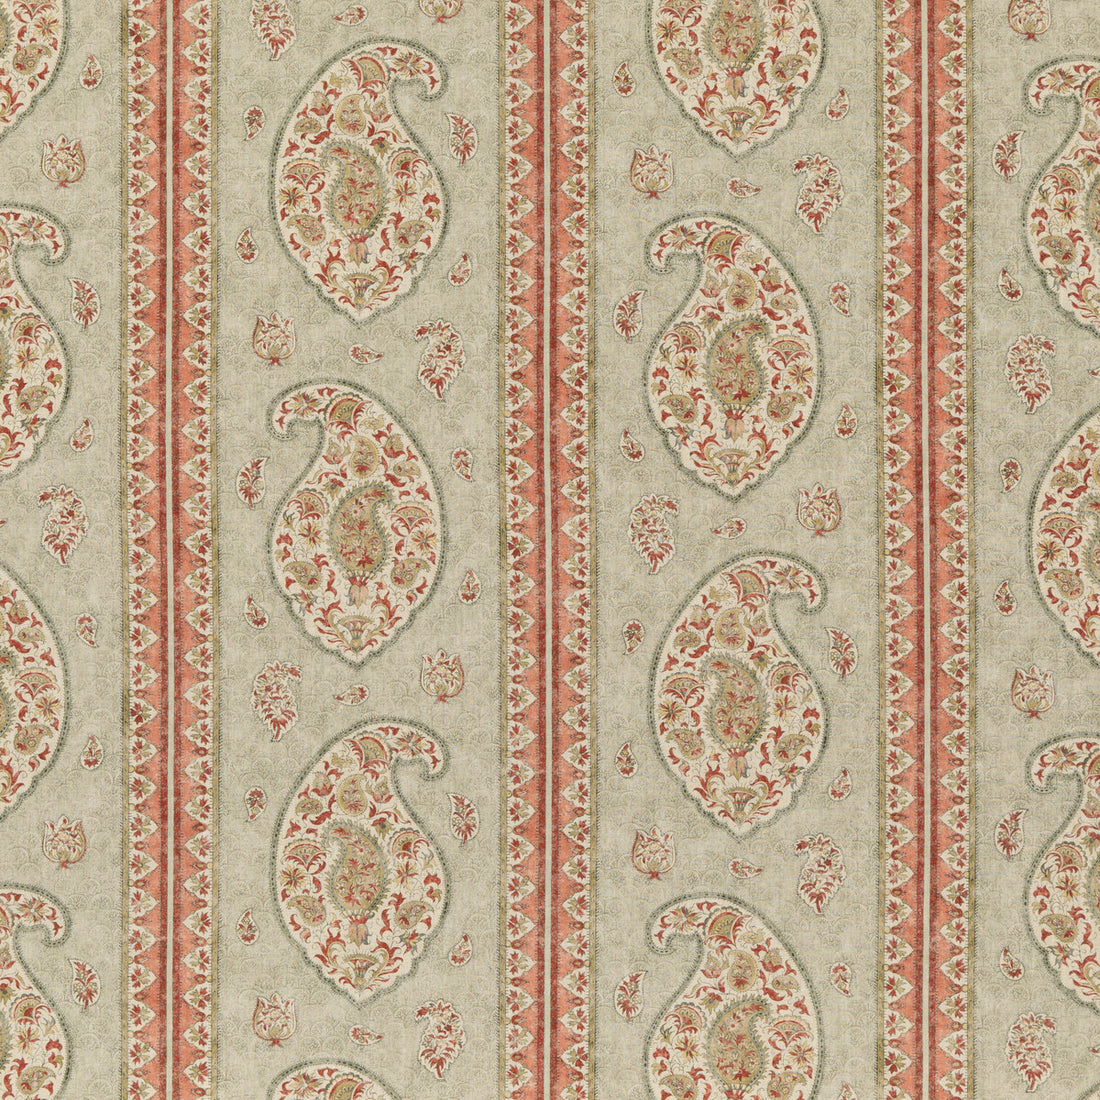 Coromandel fabric in green color - pattern BP10831.5.0 - by G P &amp; J Baker in the Coromandel collection